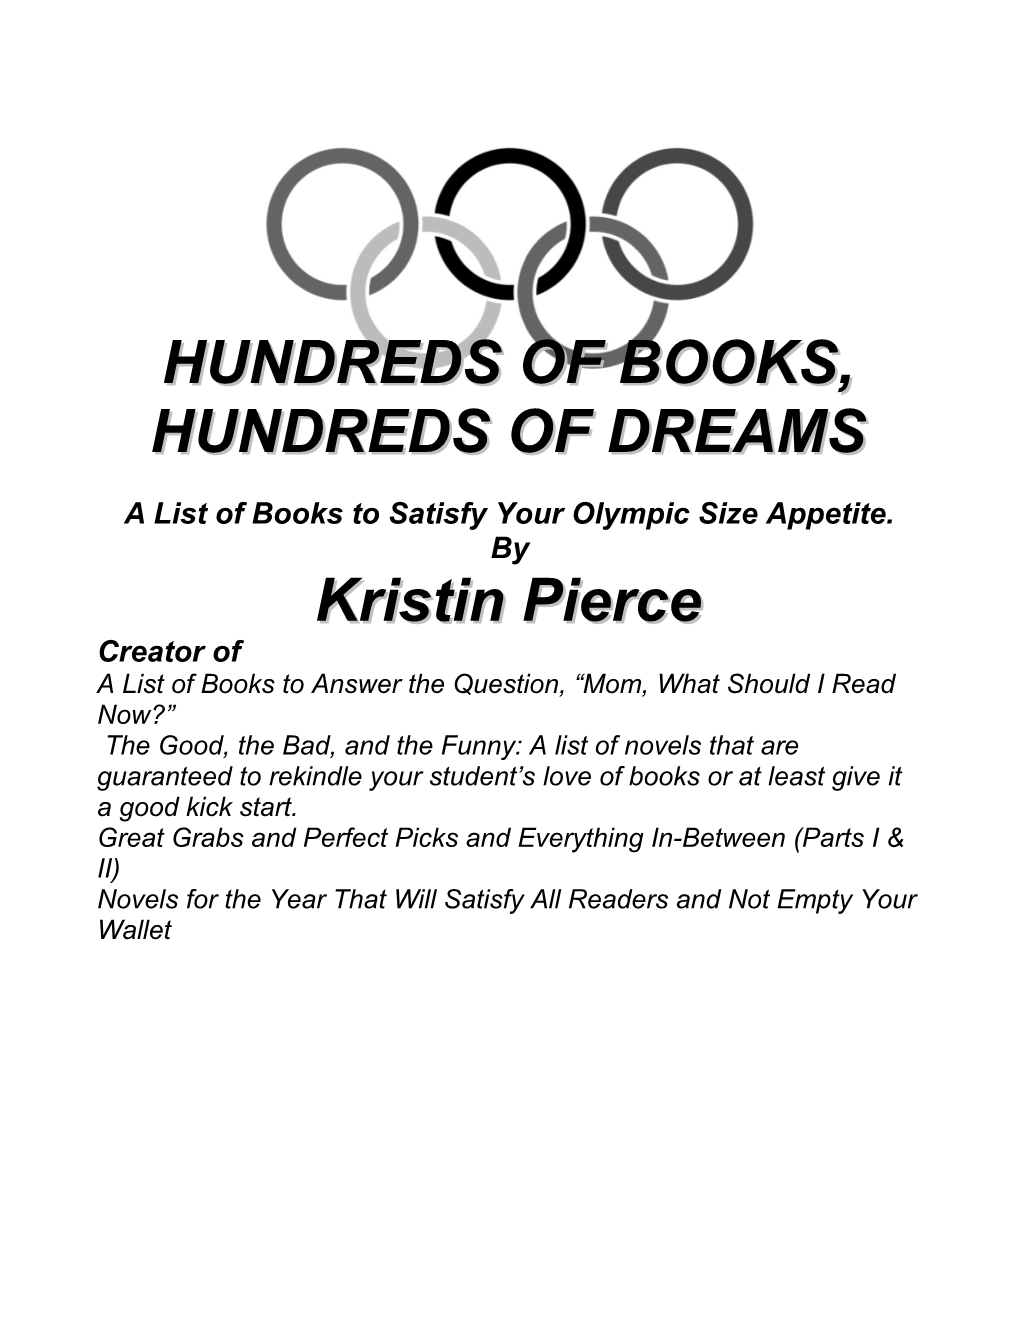 Alist of Books to Satisfy Your Olympic Size Appetite